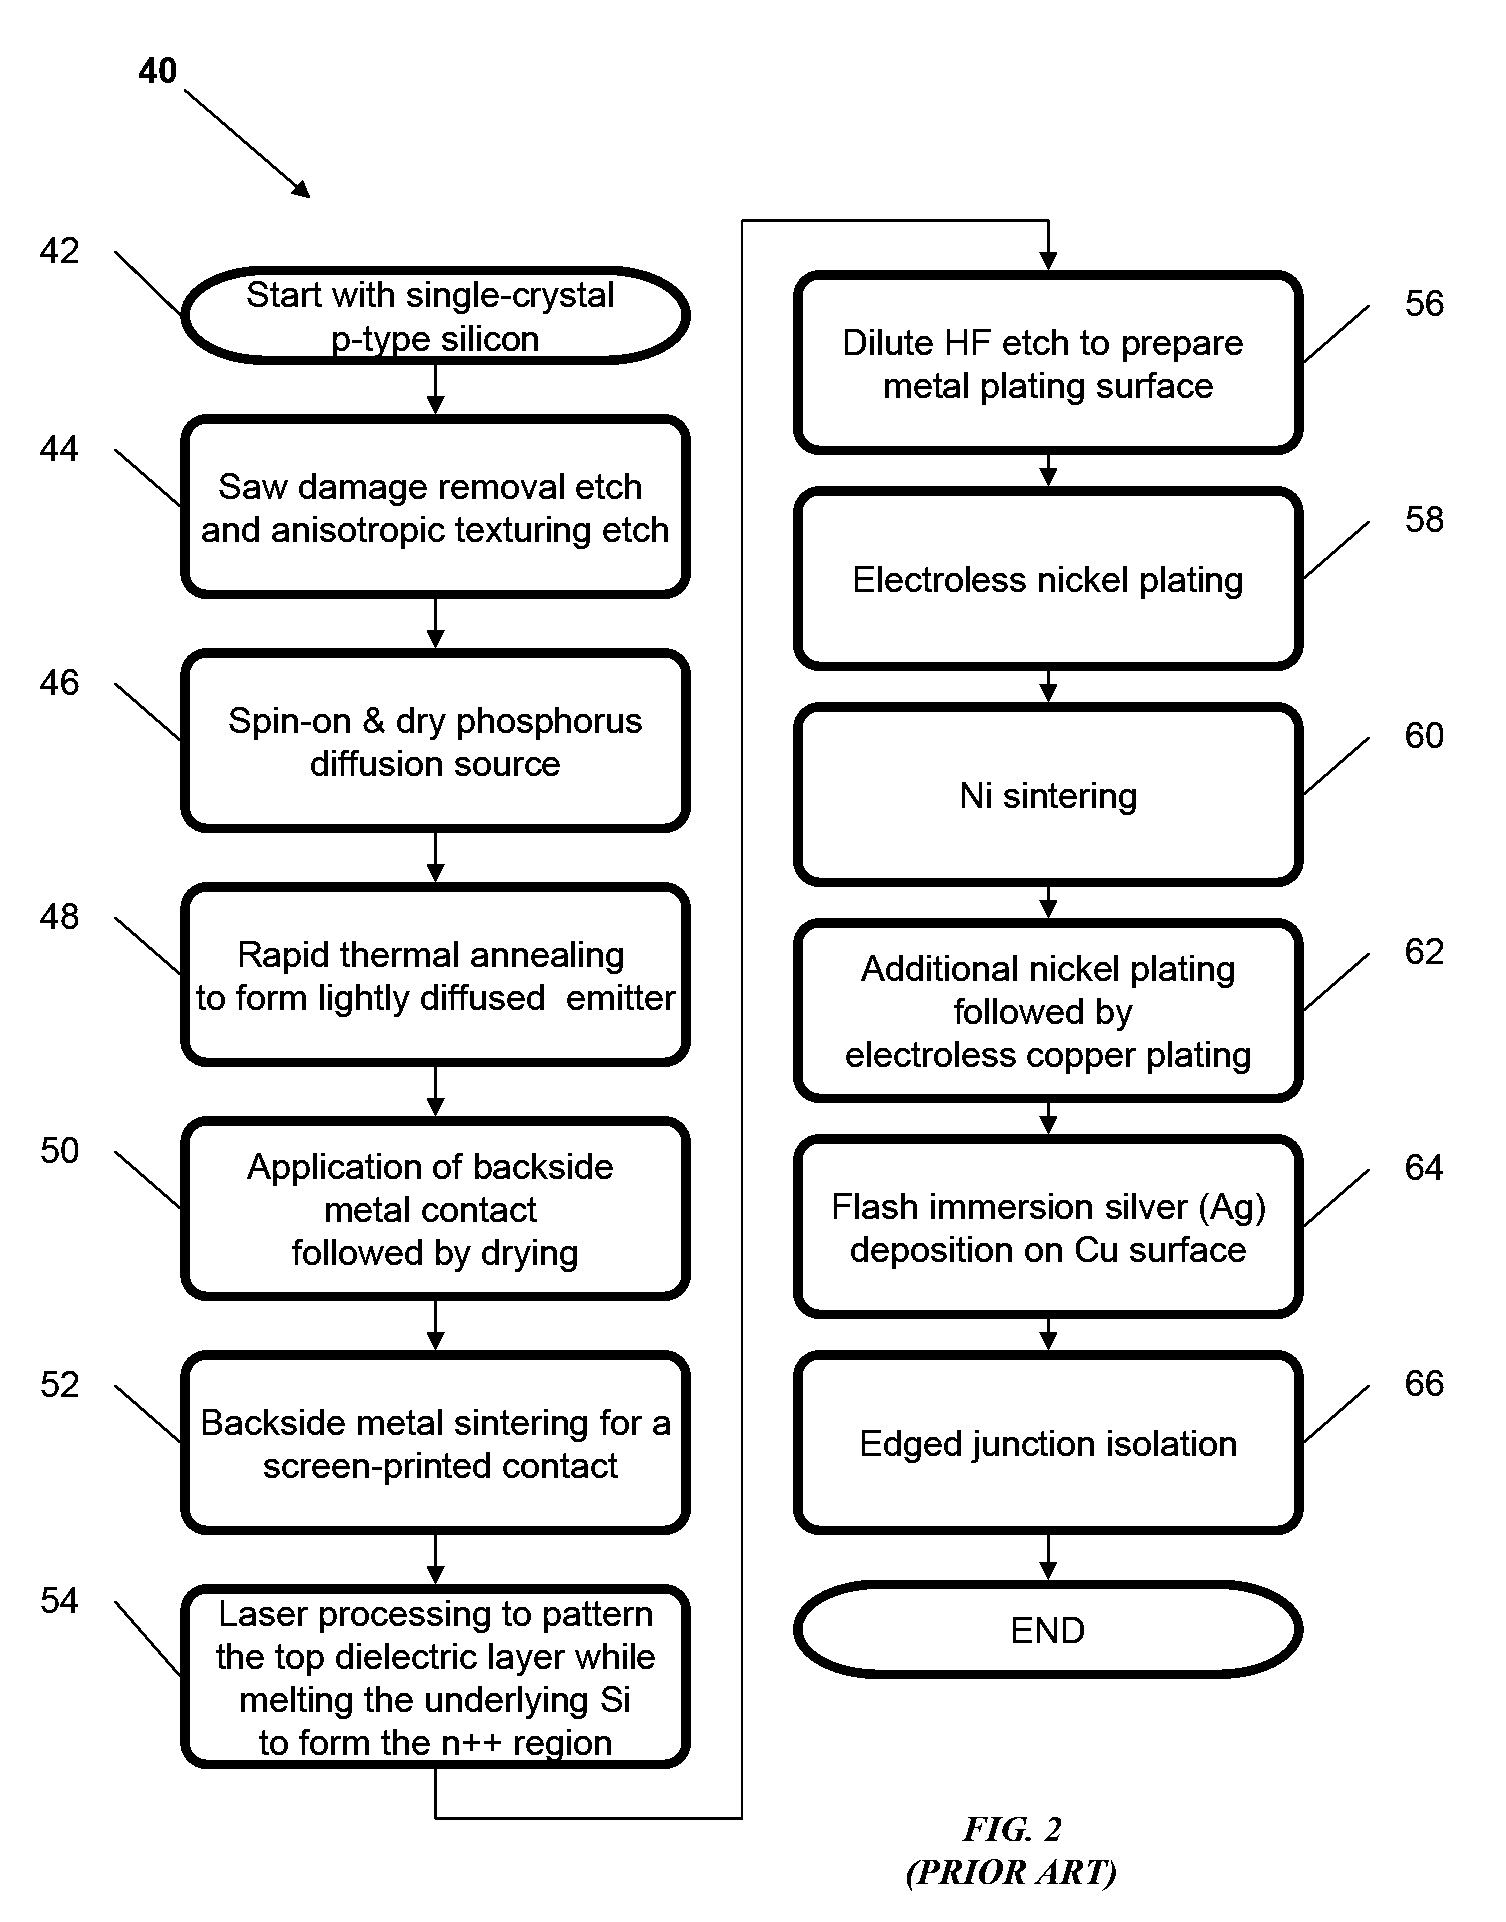 Solar module structures and assembly methods for pyramidal three-dimensional thin-film solar cells